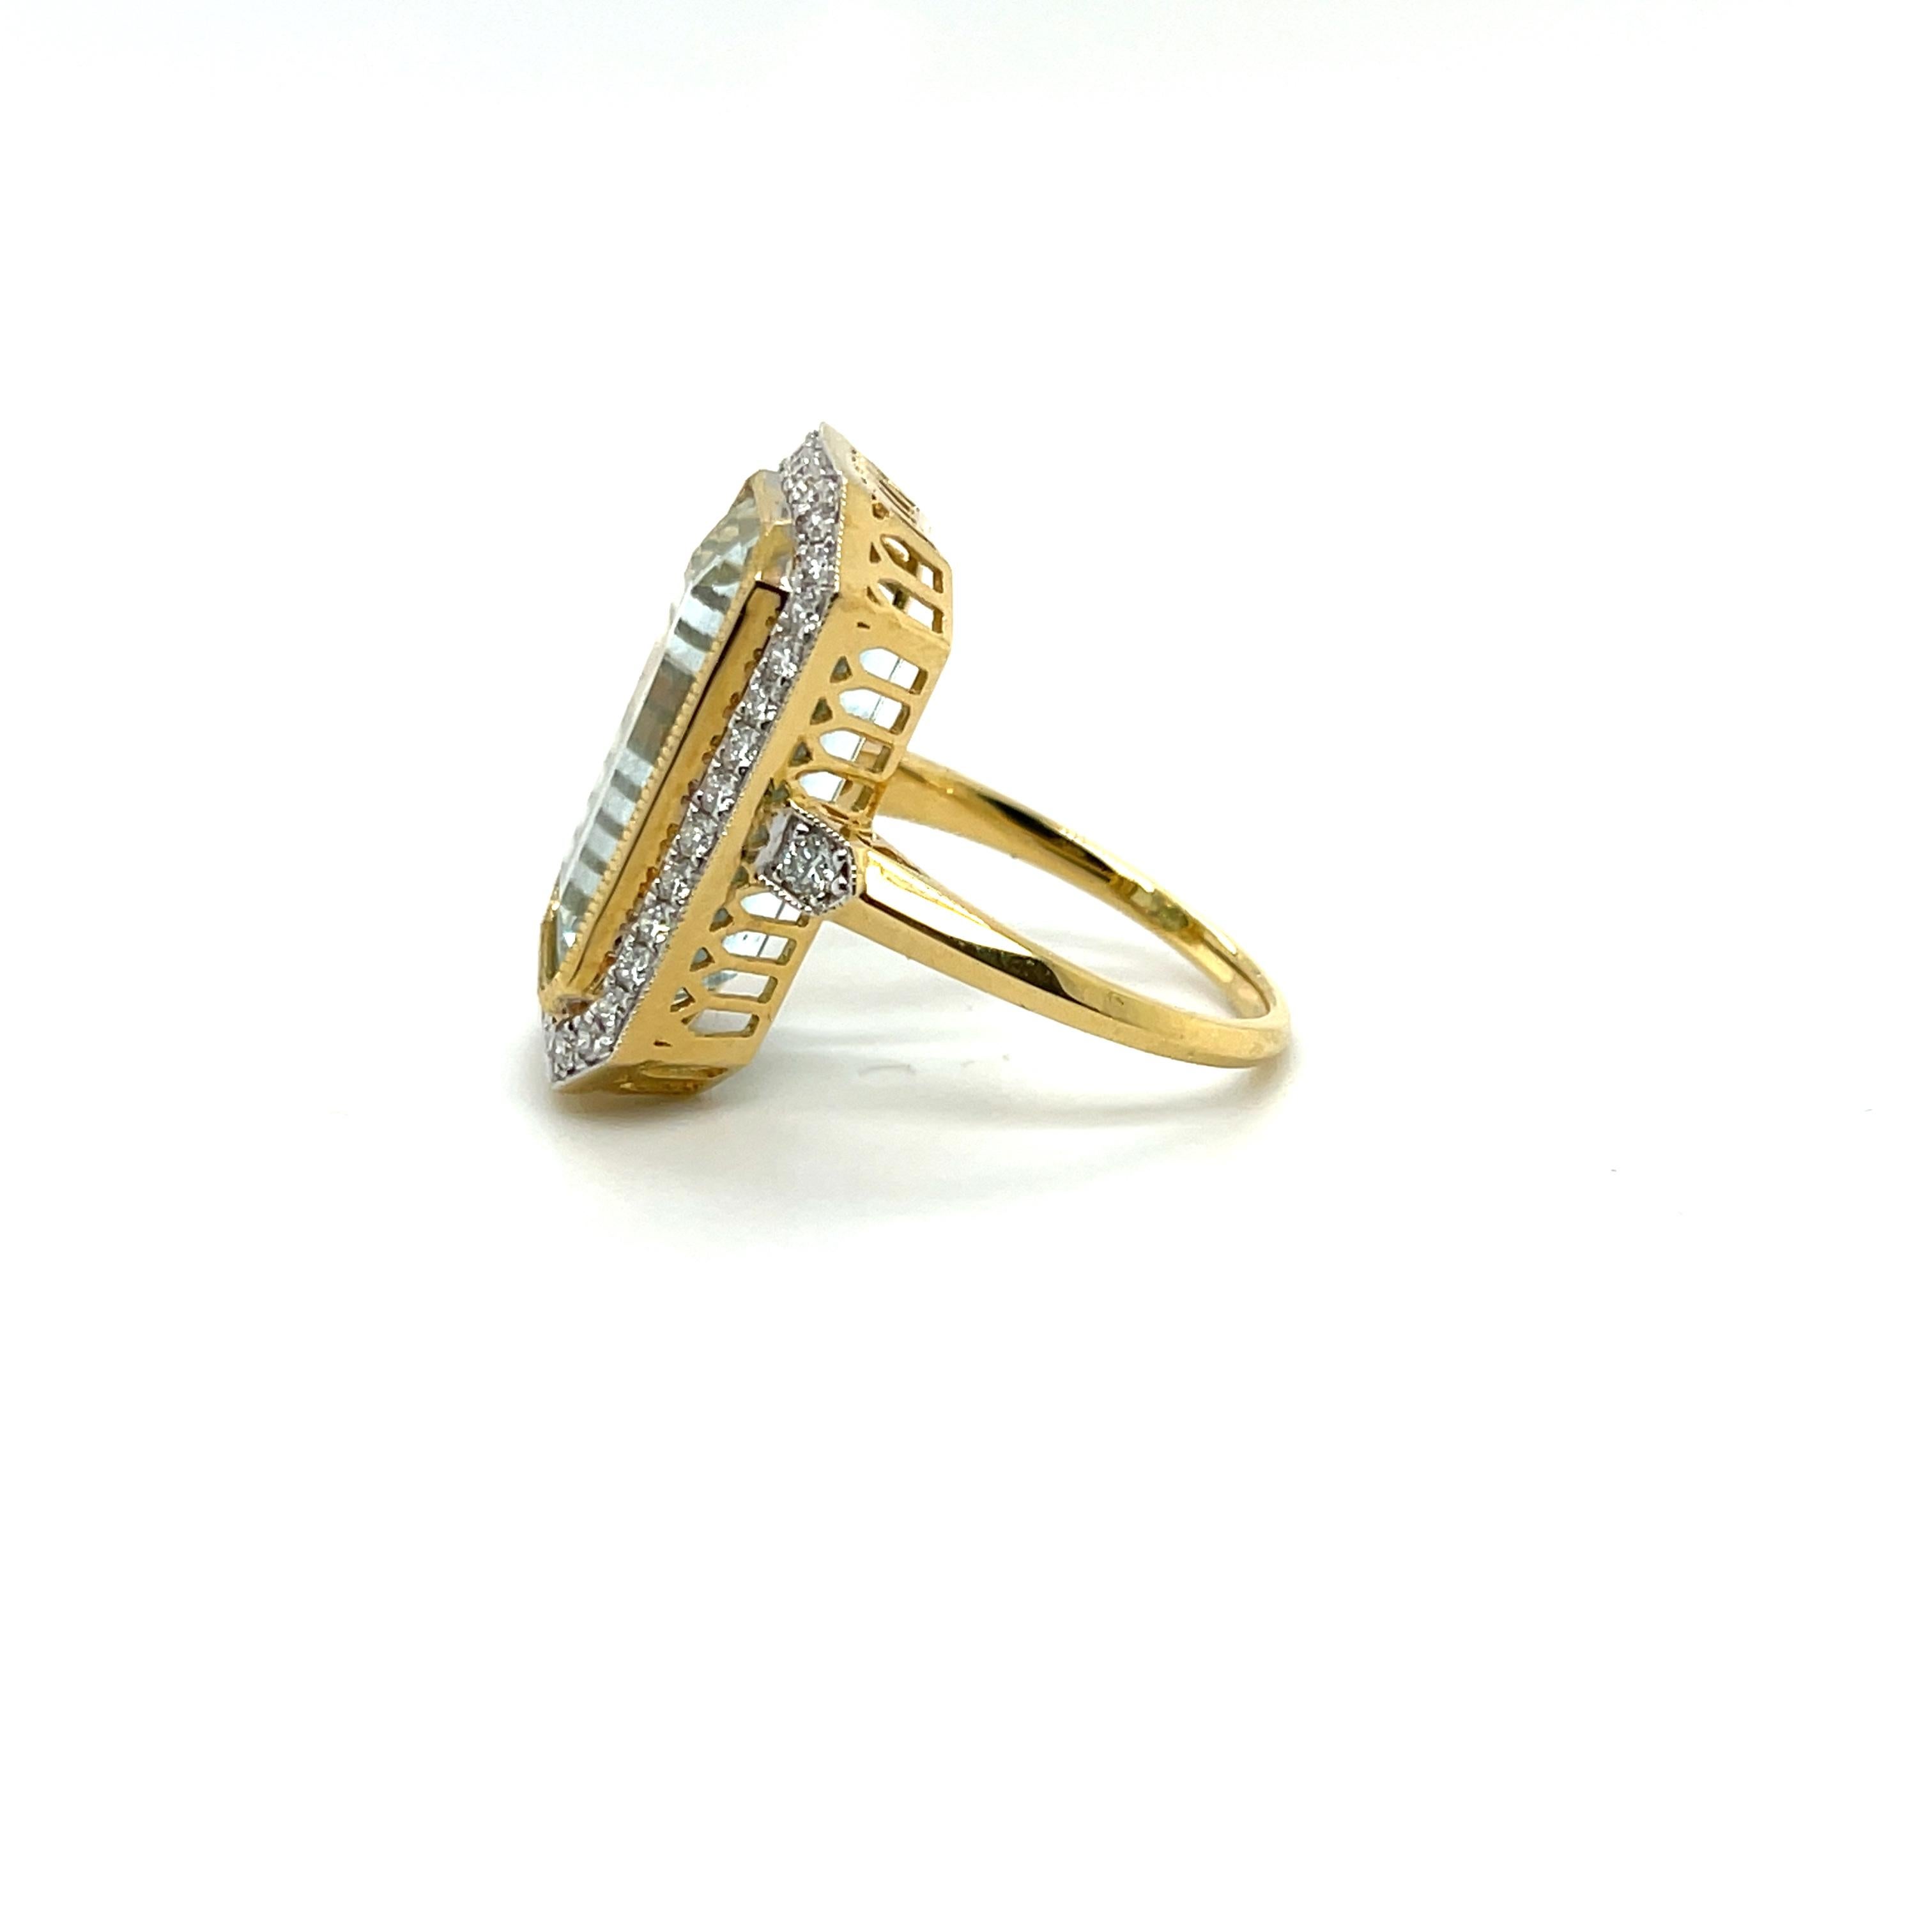 Aquamarine and Diamonds, gorgeously crafted with eighteen karat yellow gold , complimented by a stunning polished finish design. 


Item 1
One ladies - 18ct yellow gold dress ring, narrow, high half round, parallel shank with open
back, rub over